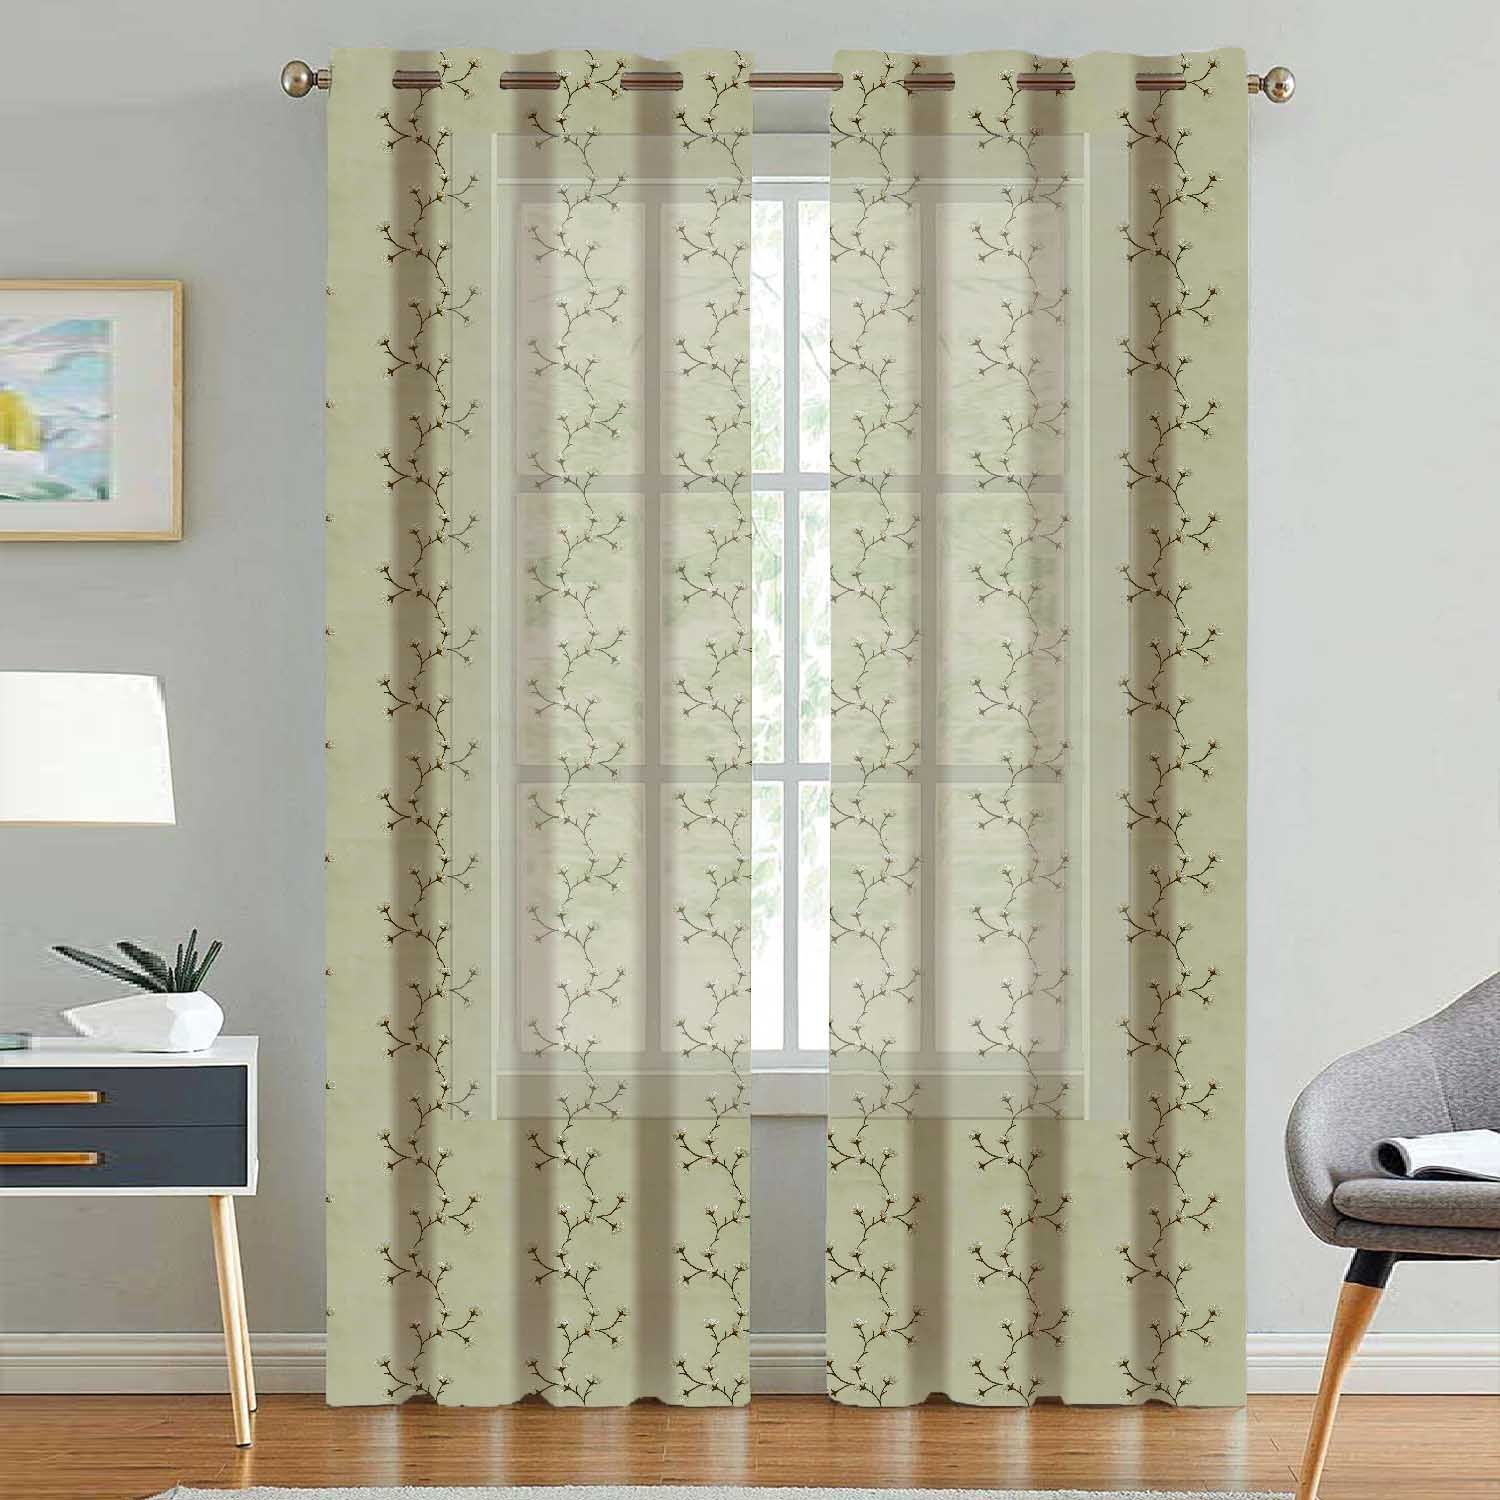 Shop High-Quality Curtains and Drapes Online at Drapo